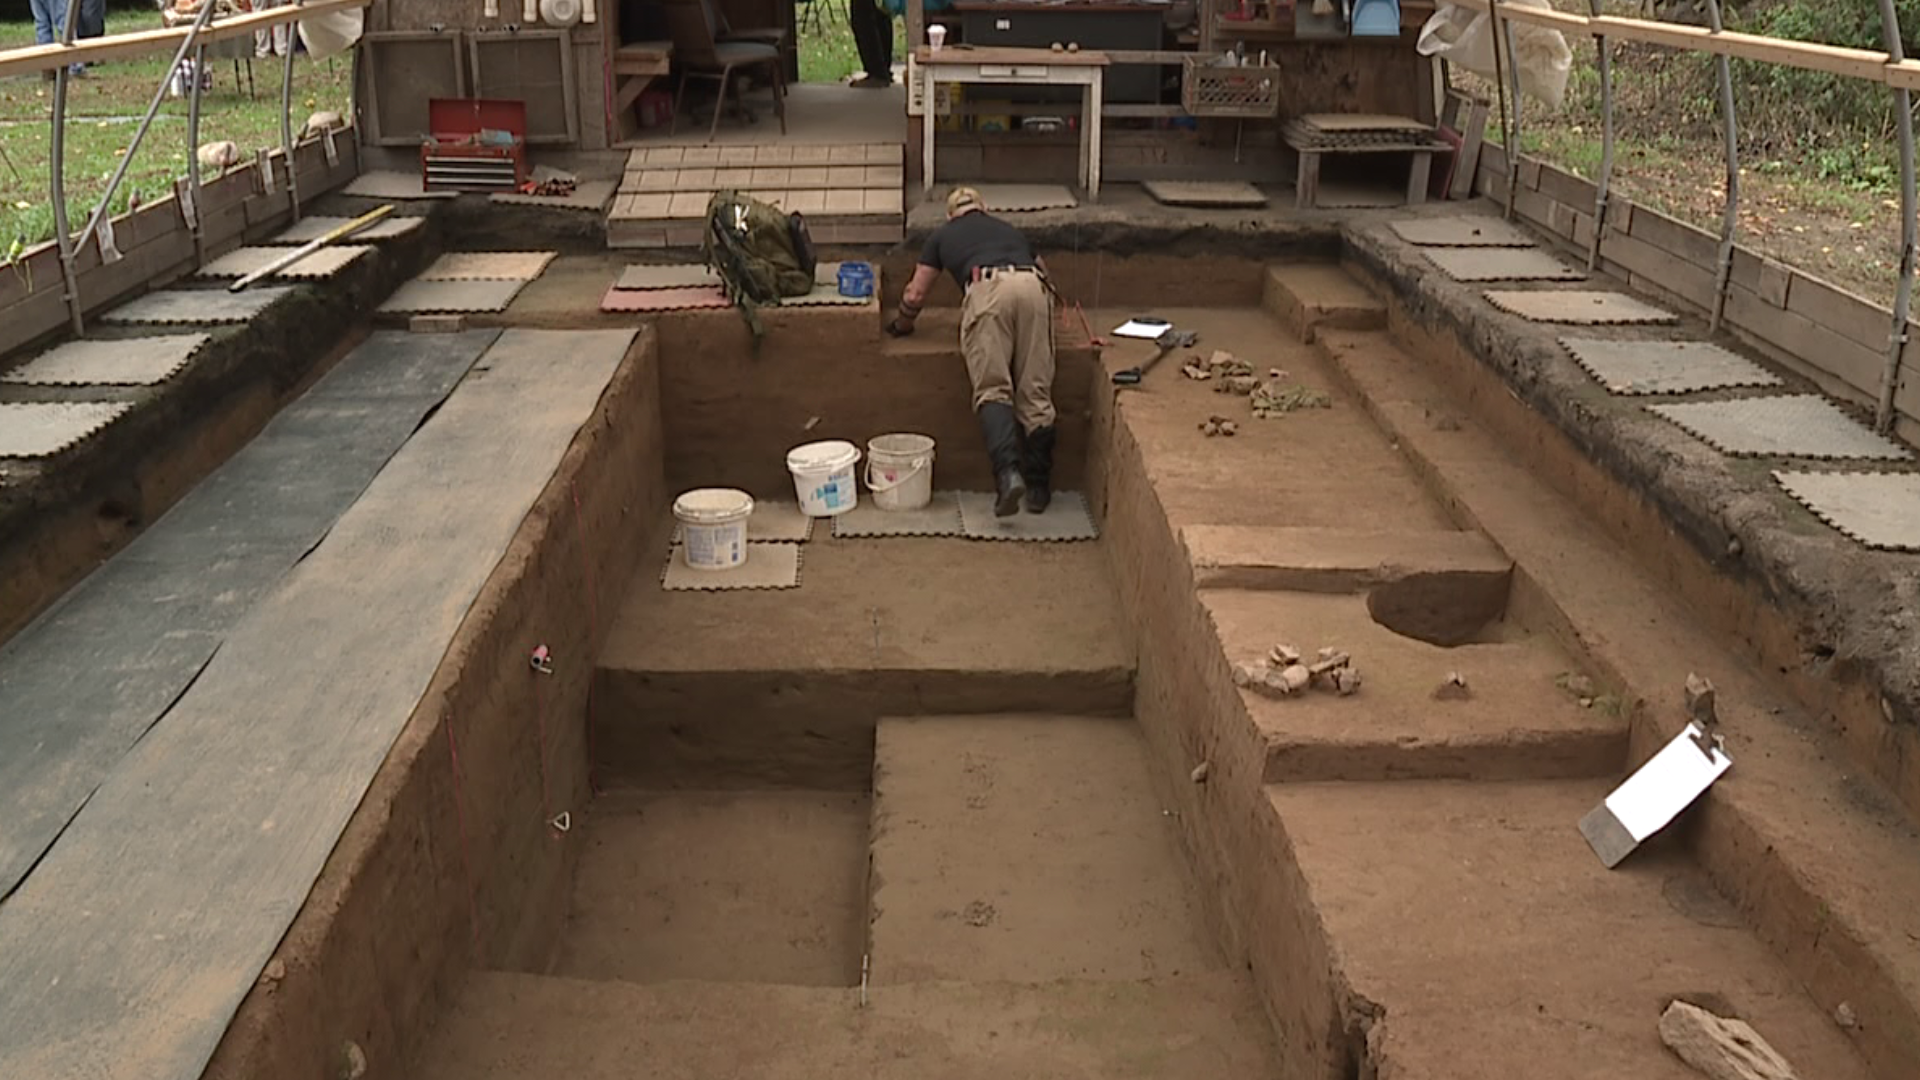 The archaeological society in Luzerne County invites people to watch what they find or take part in the dig.